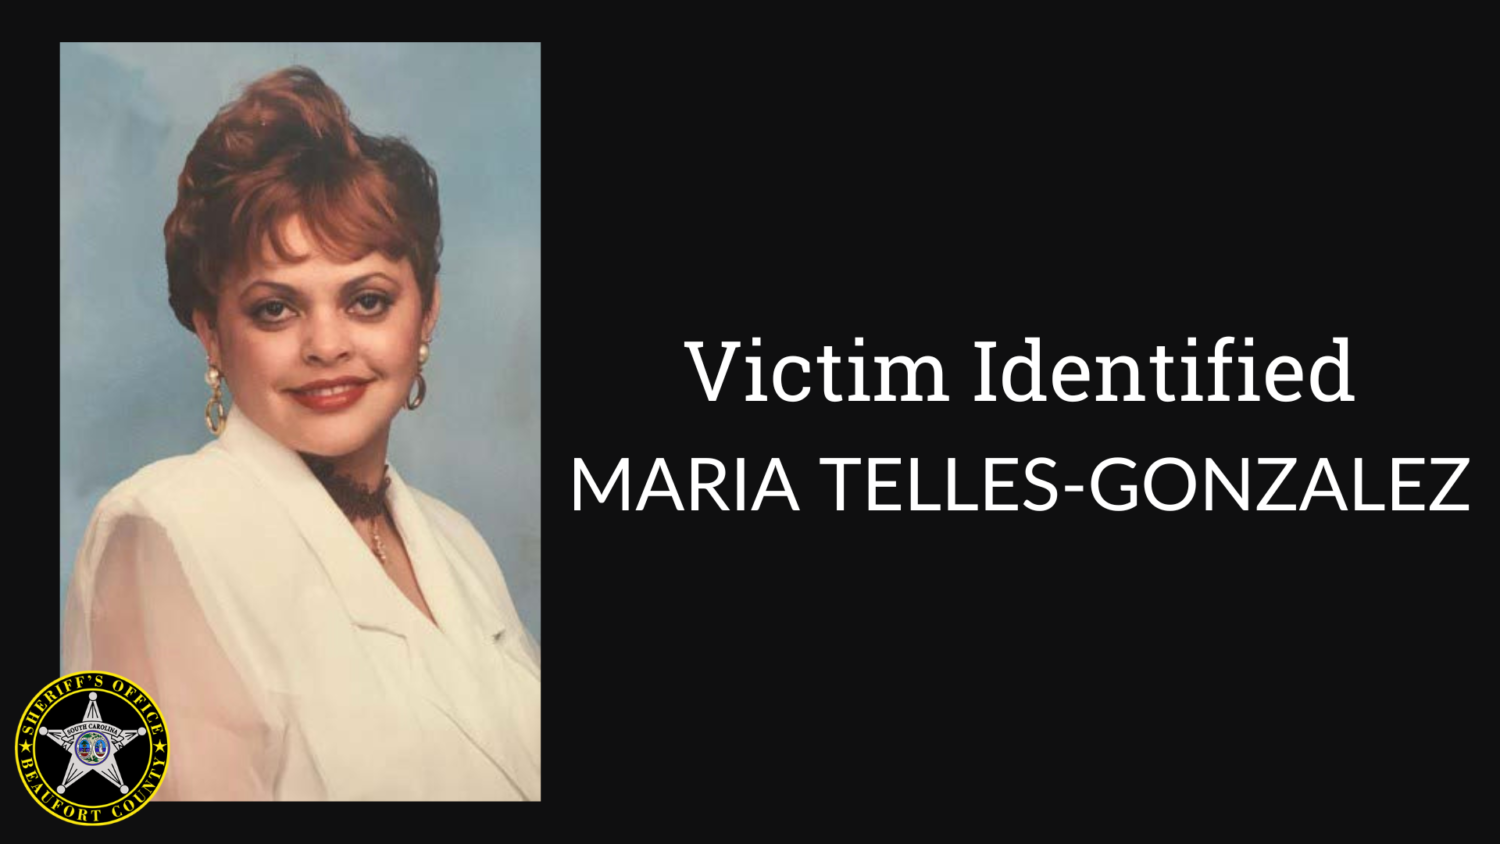 Forensic science and genealogy help identify 1995 murder victim as a Florida woman • Cold Case pic